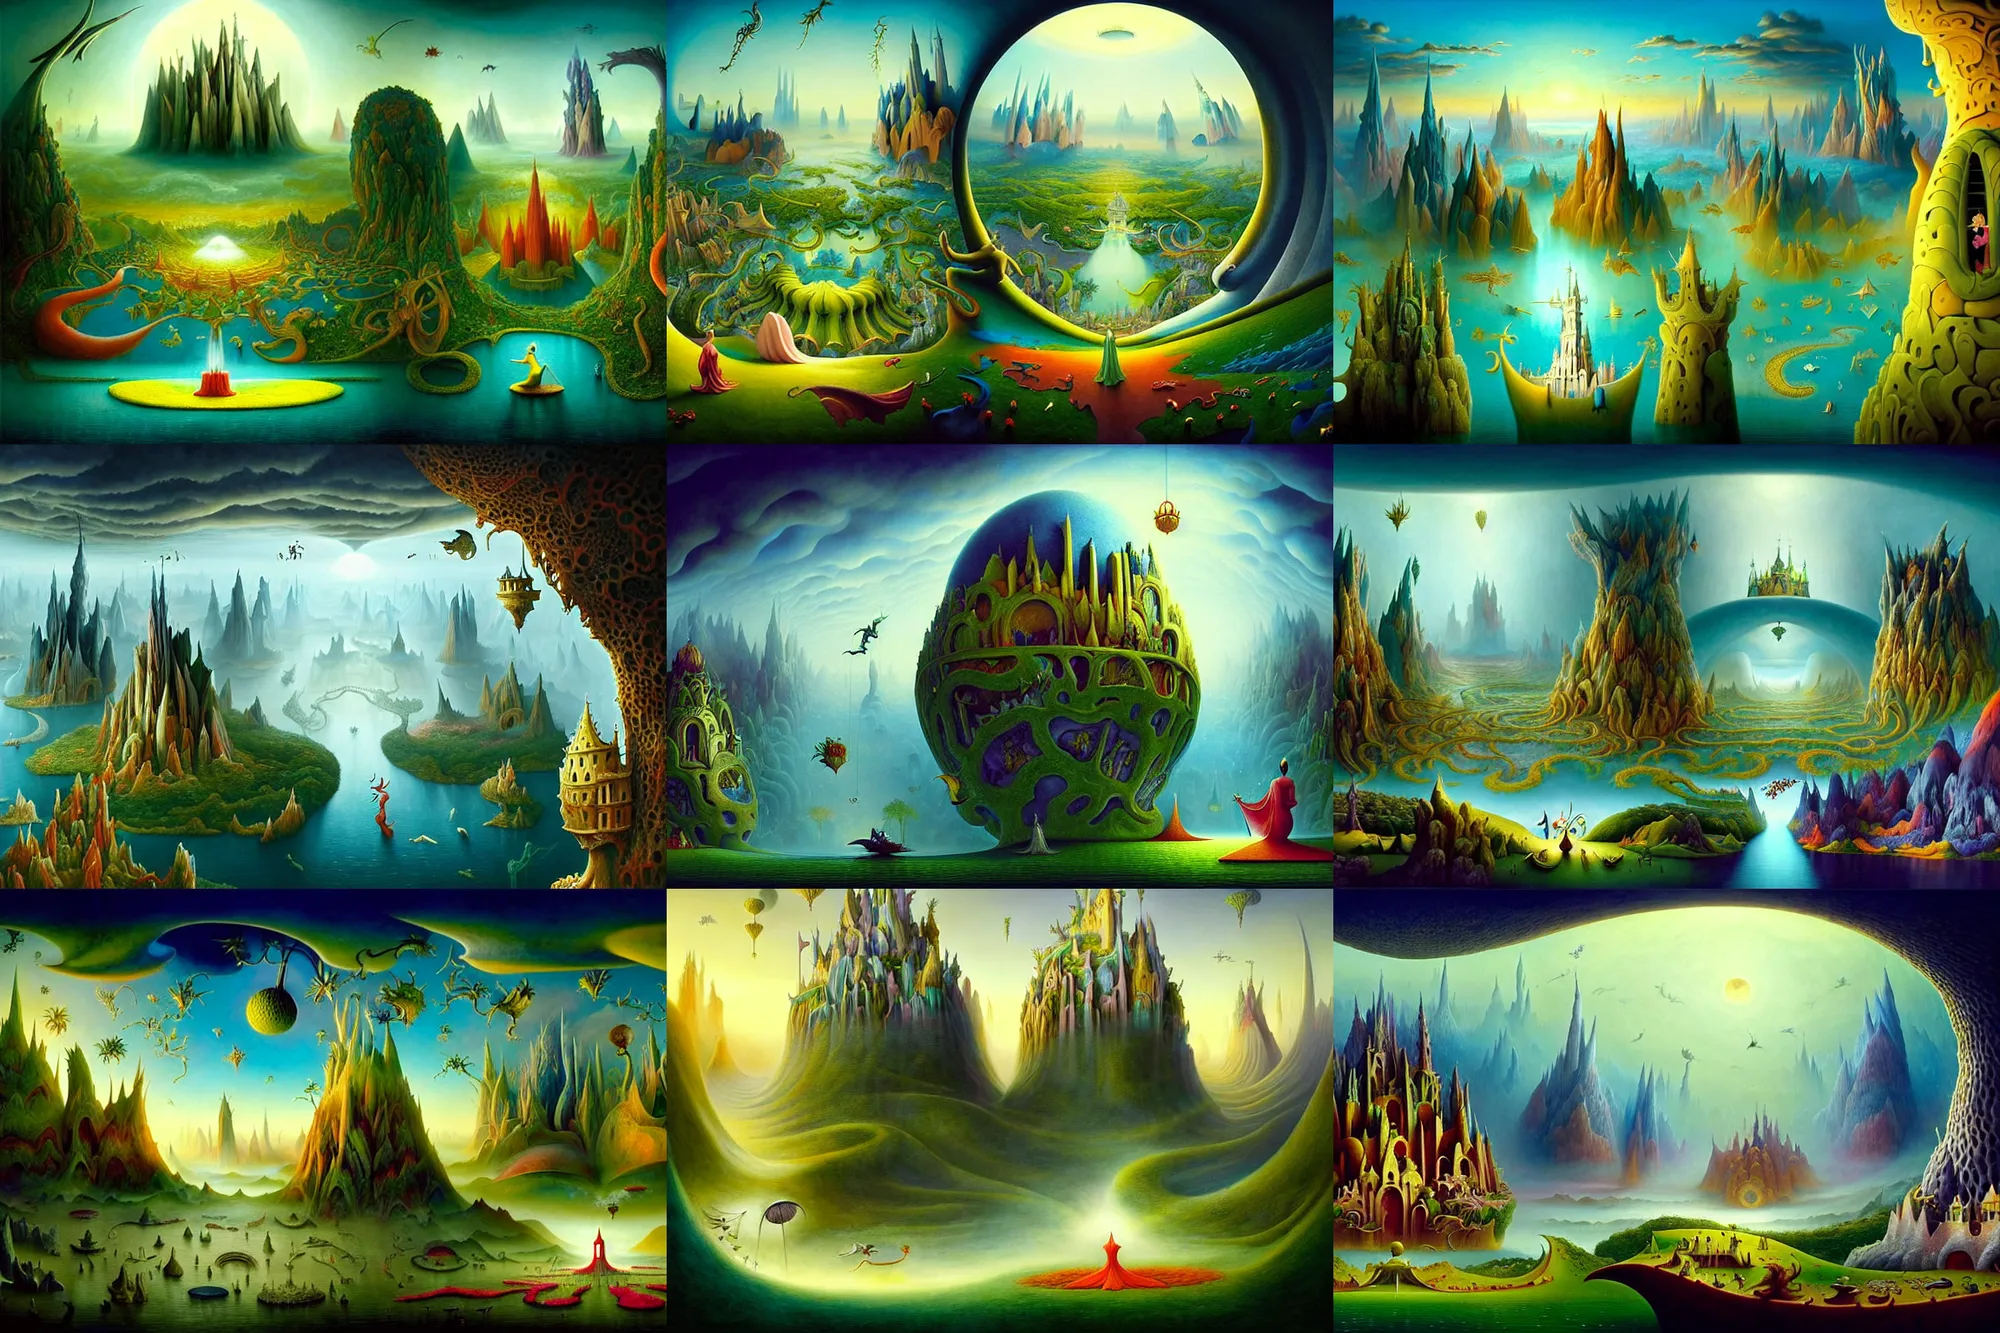 Prompt: a beguiling epic stunning beautiful and insanely detailed matte painting of windows into dream worlds with surreal architecture designed by Heironymous Bosch, dream world populated with mythical whimsical creatures, mega structures inspired by Heironymous Bosch's Garden of Earthly Delights, vast surreal landscape and horizon by Cyril Rolando and Paul Lehr and Raymond Swanland, masterpiece!!!, grand!, imaginative!!!, whimsical!!, epic scale, intricate details, sense of awe, elite, wonder, insanely complex, masterful composition!!!, sharp focus, fantasy realism, dramatic lighting